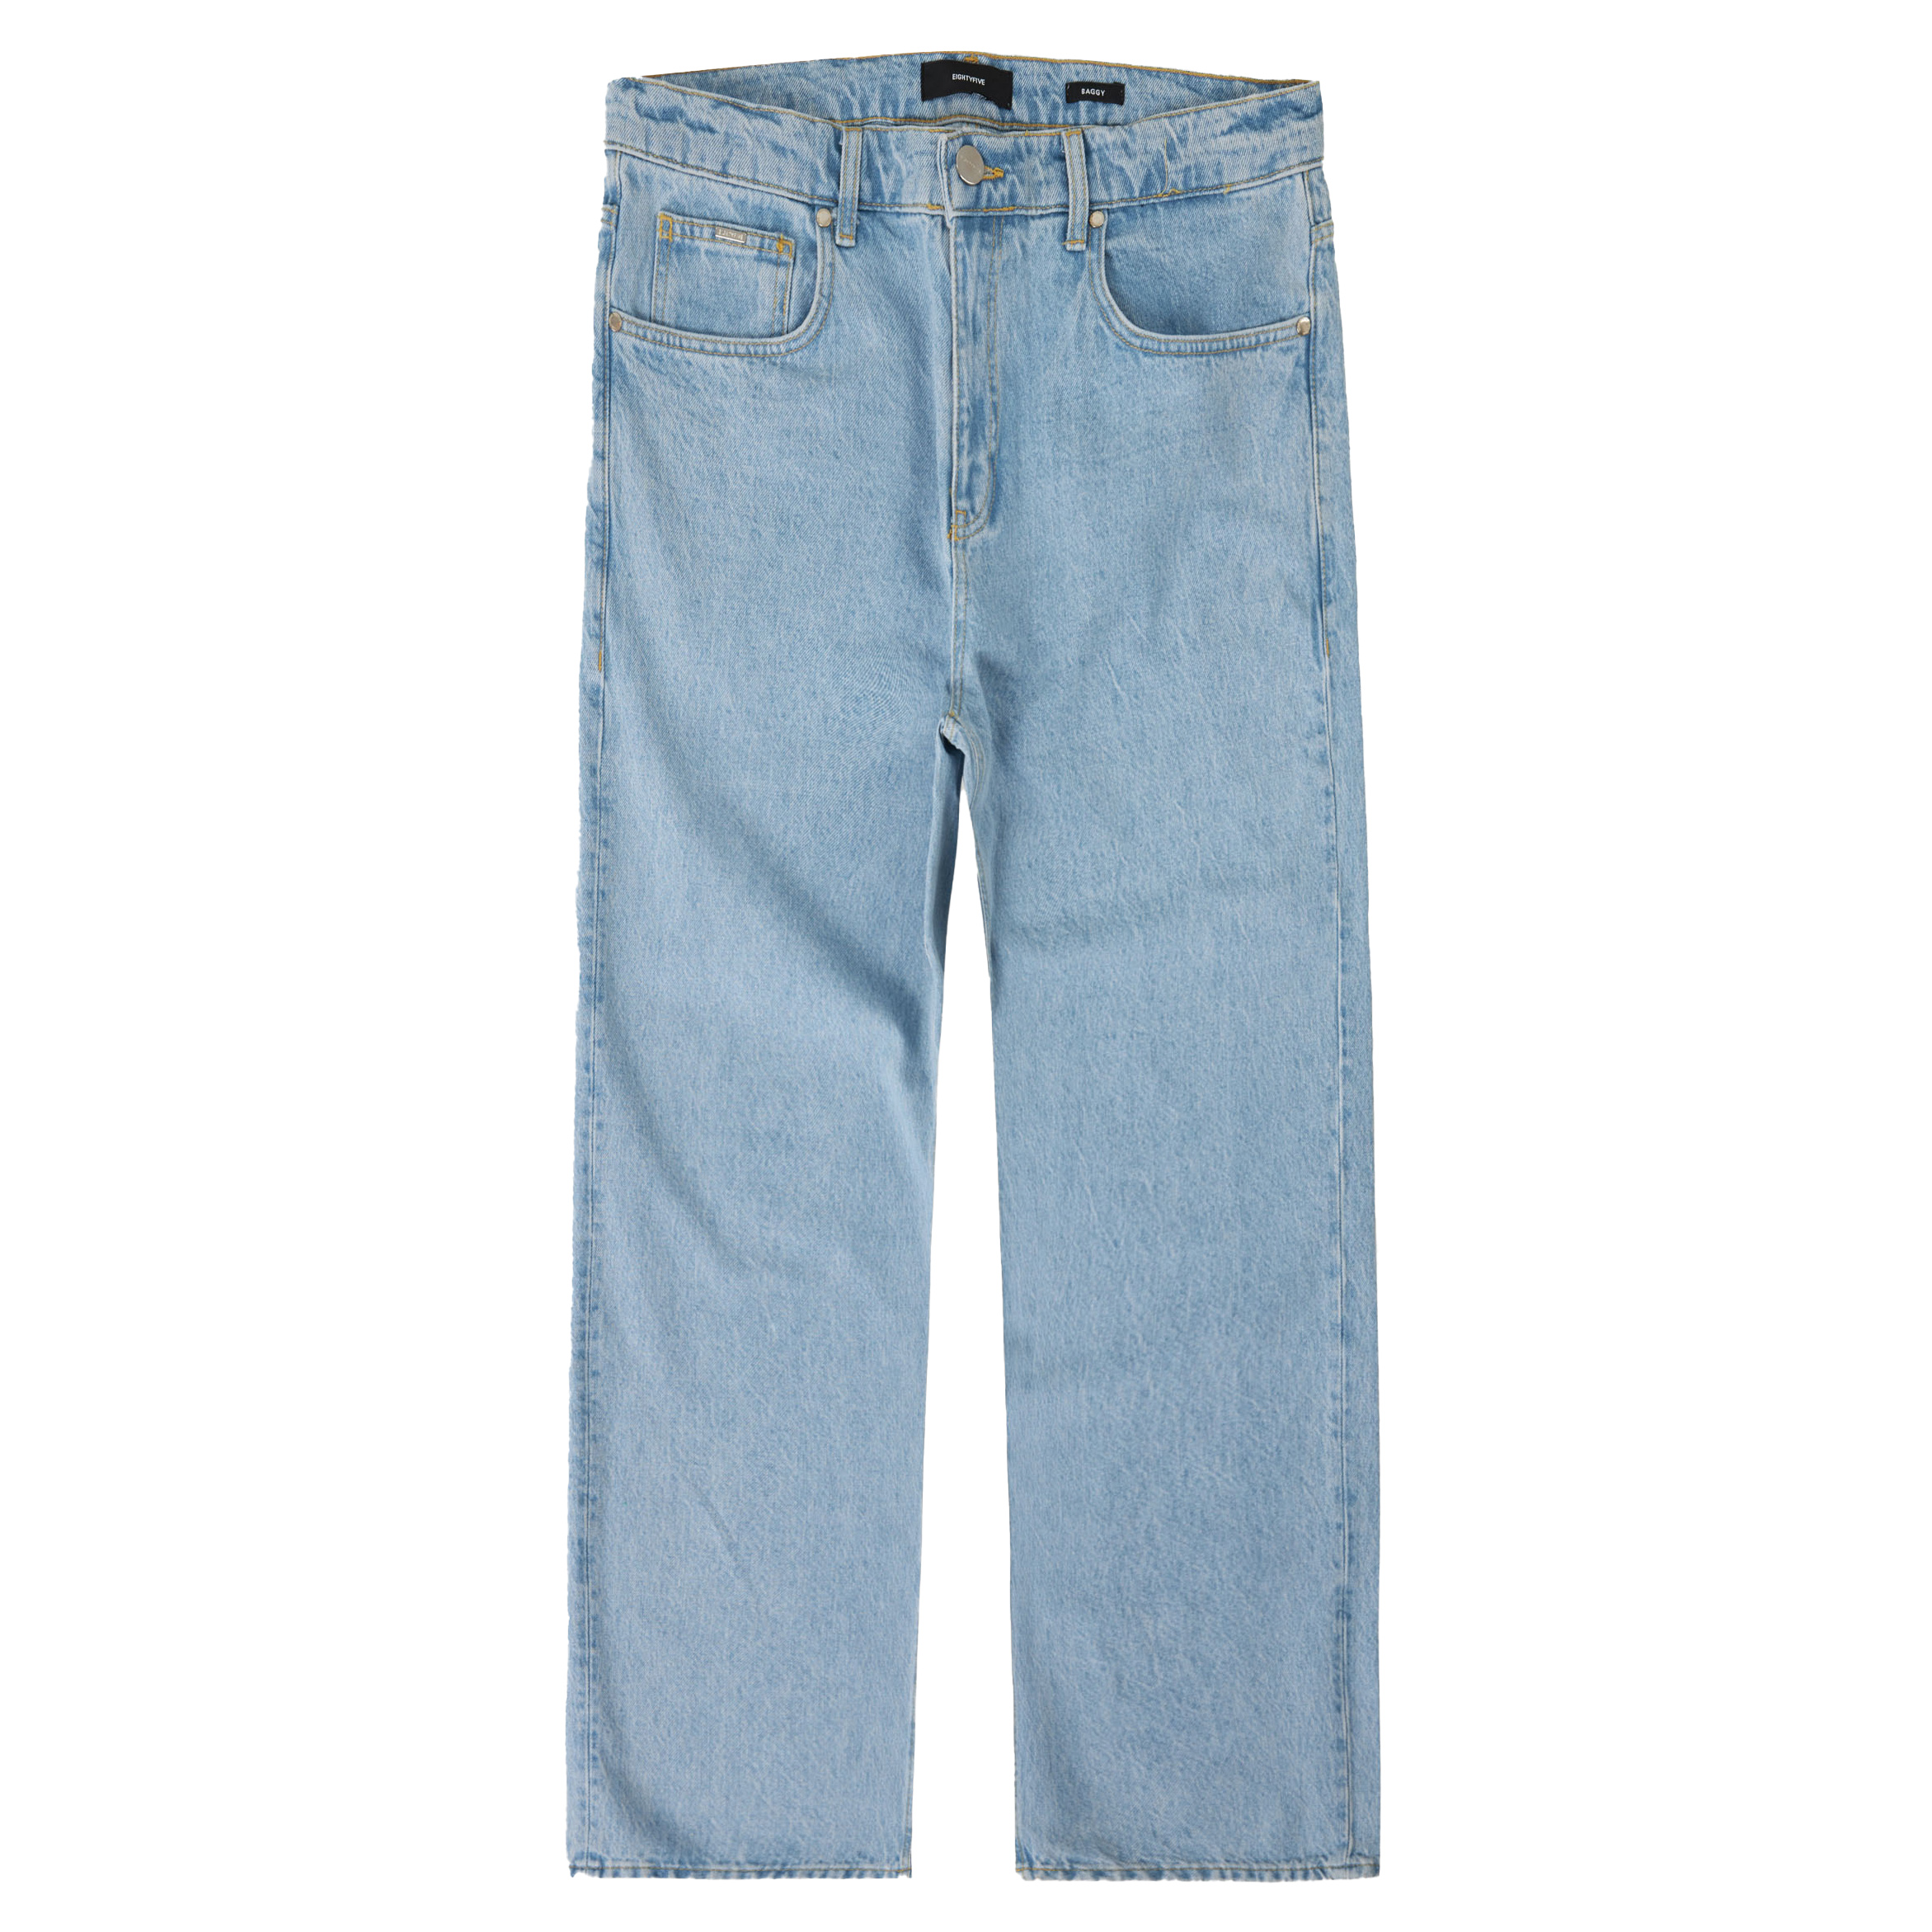 Eightyfive Distressed Baggy Jeans, Vintage Blue